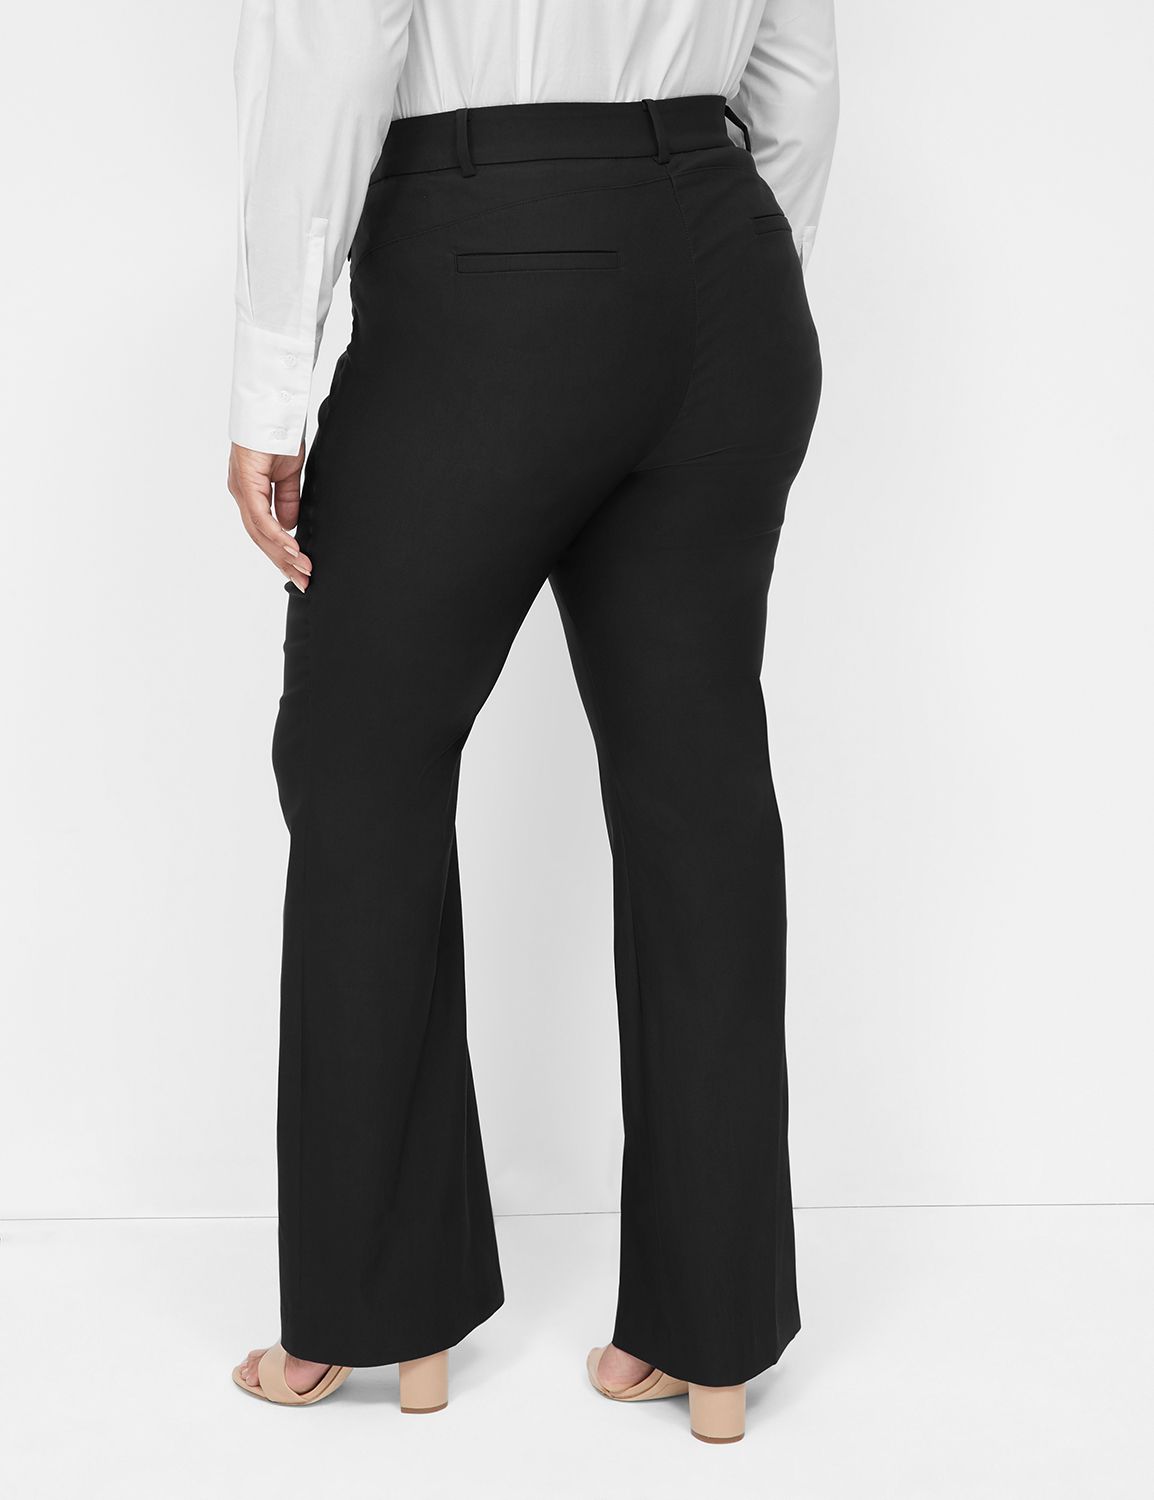 Wrinkle-Free Stretch Dress Pants Plus Size for Women Pull-on Pant Comfort  XL